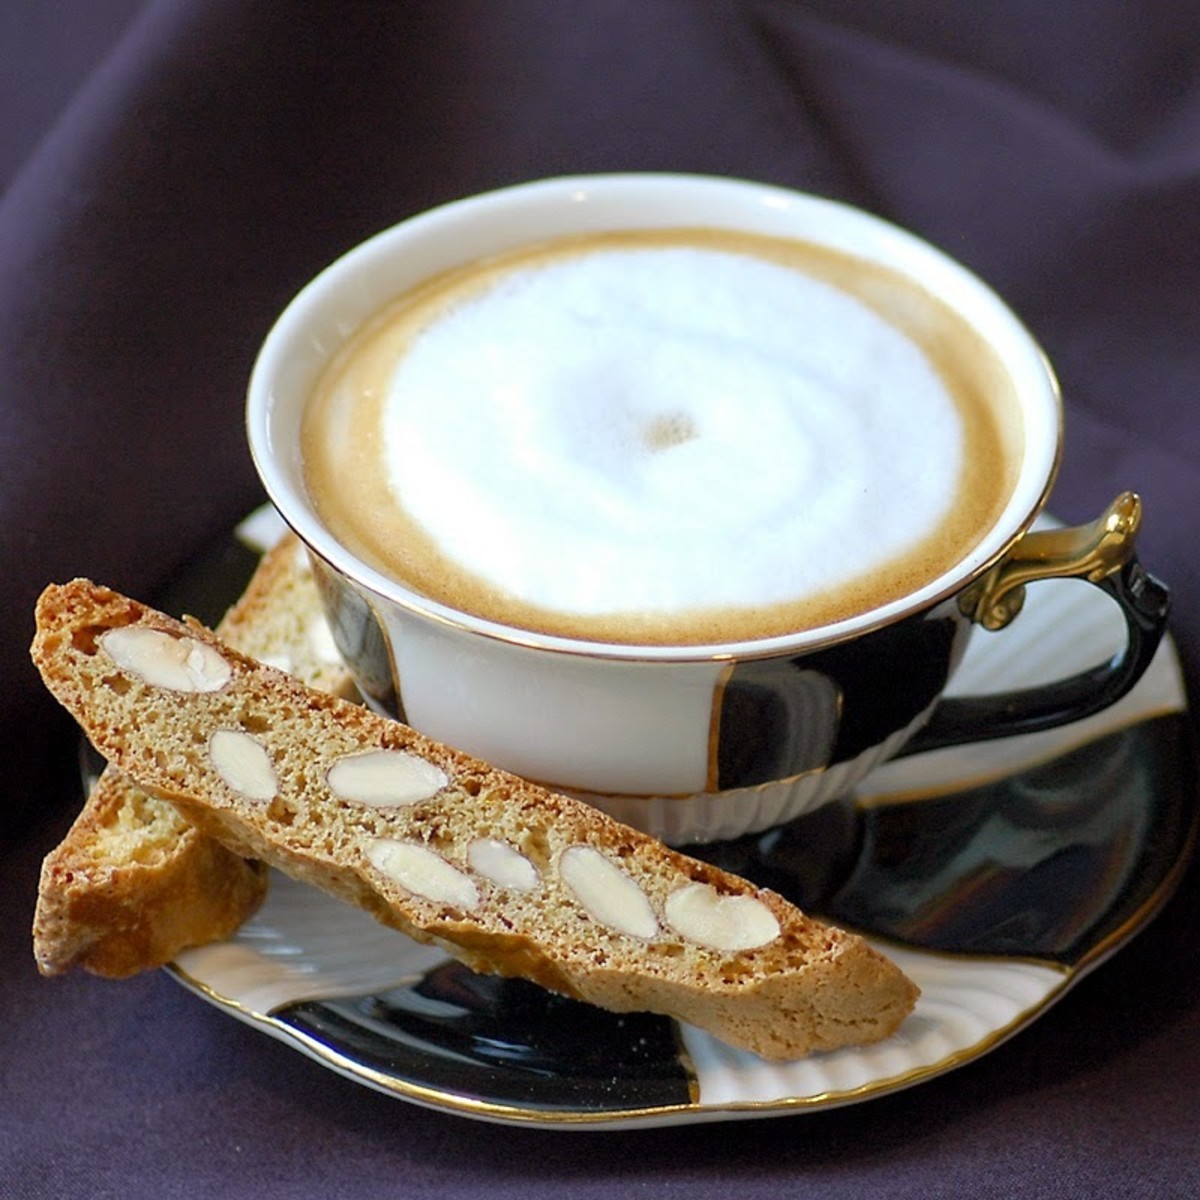 The crunchy biscotti dunks in the capuccino coffee cup.